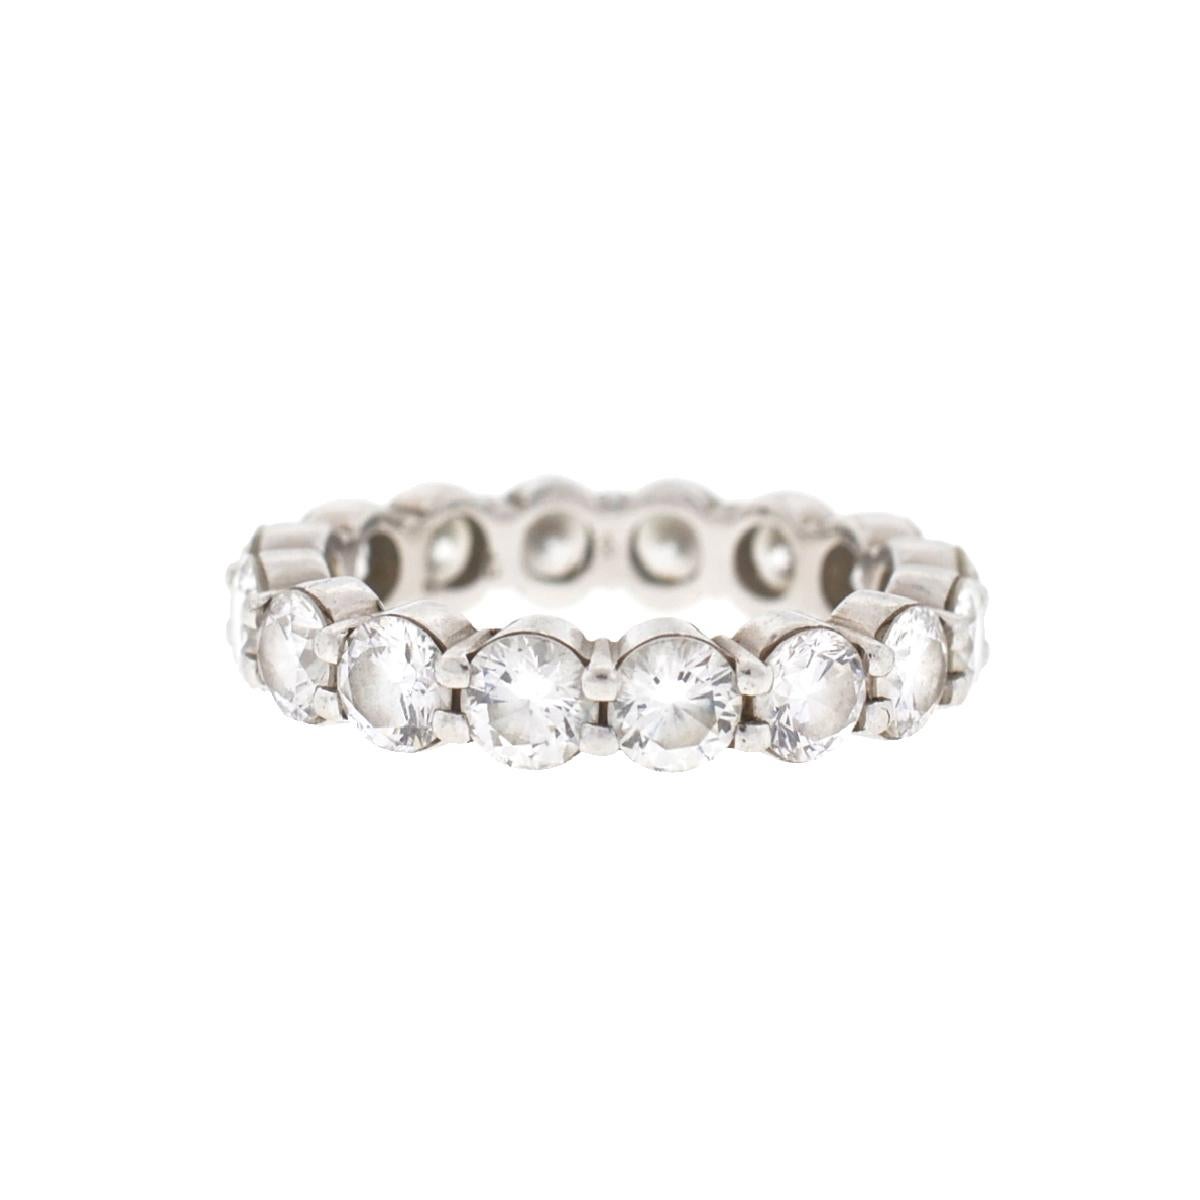 Company-N/A
Style-Eternity Band Ring
Metal-18k White Gold
Size-6.50
Weight-5.89 Grams
Stones-Diamonds  - 15 round diamonds total of 3.75 Cts